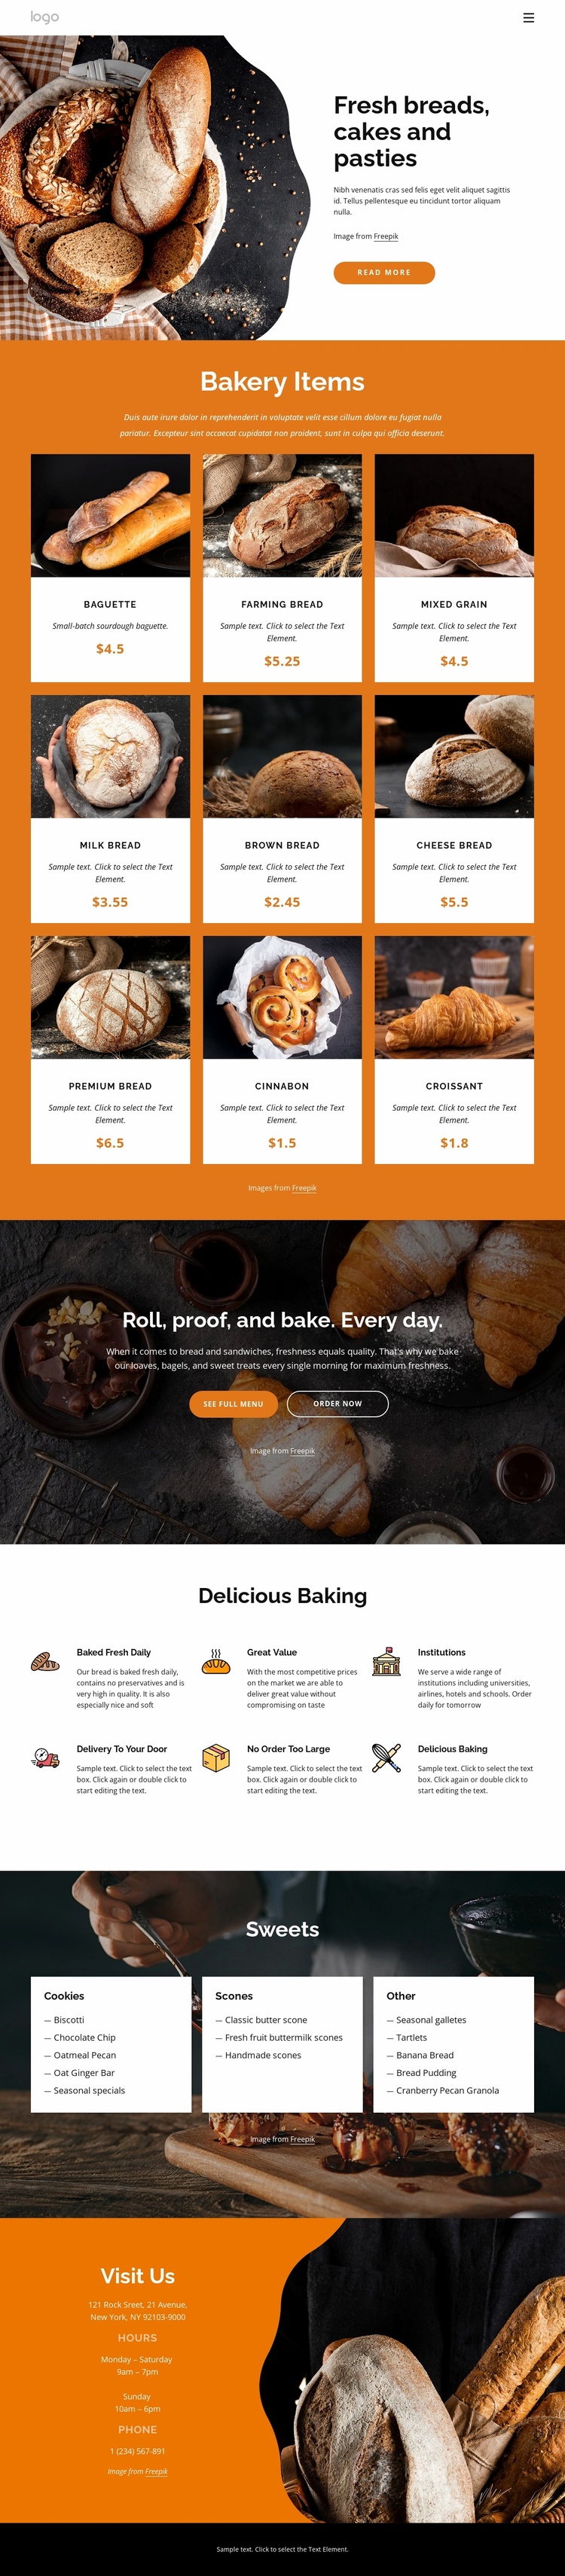 Fresh breads and cakes eCommerce Website Design